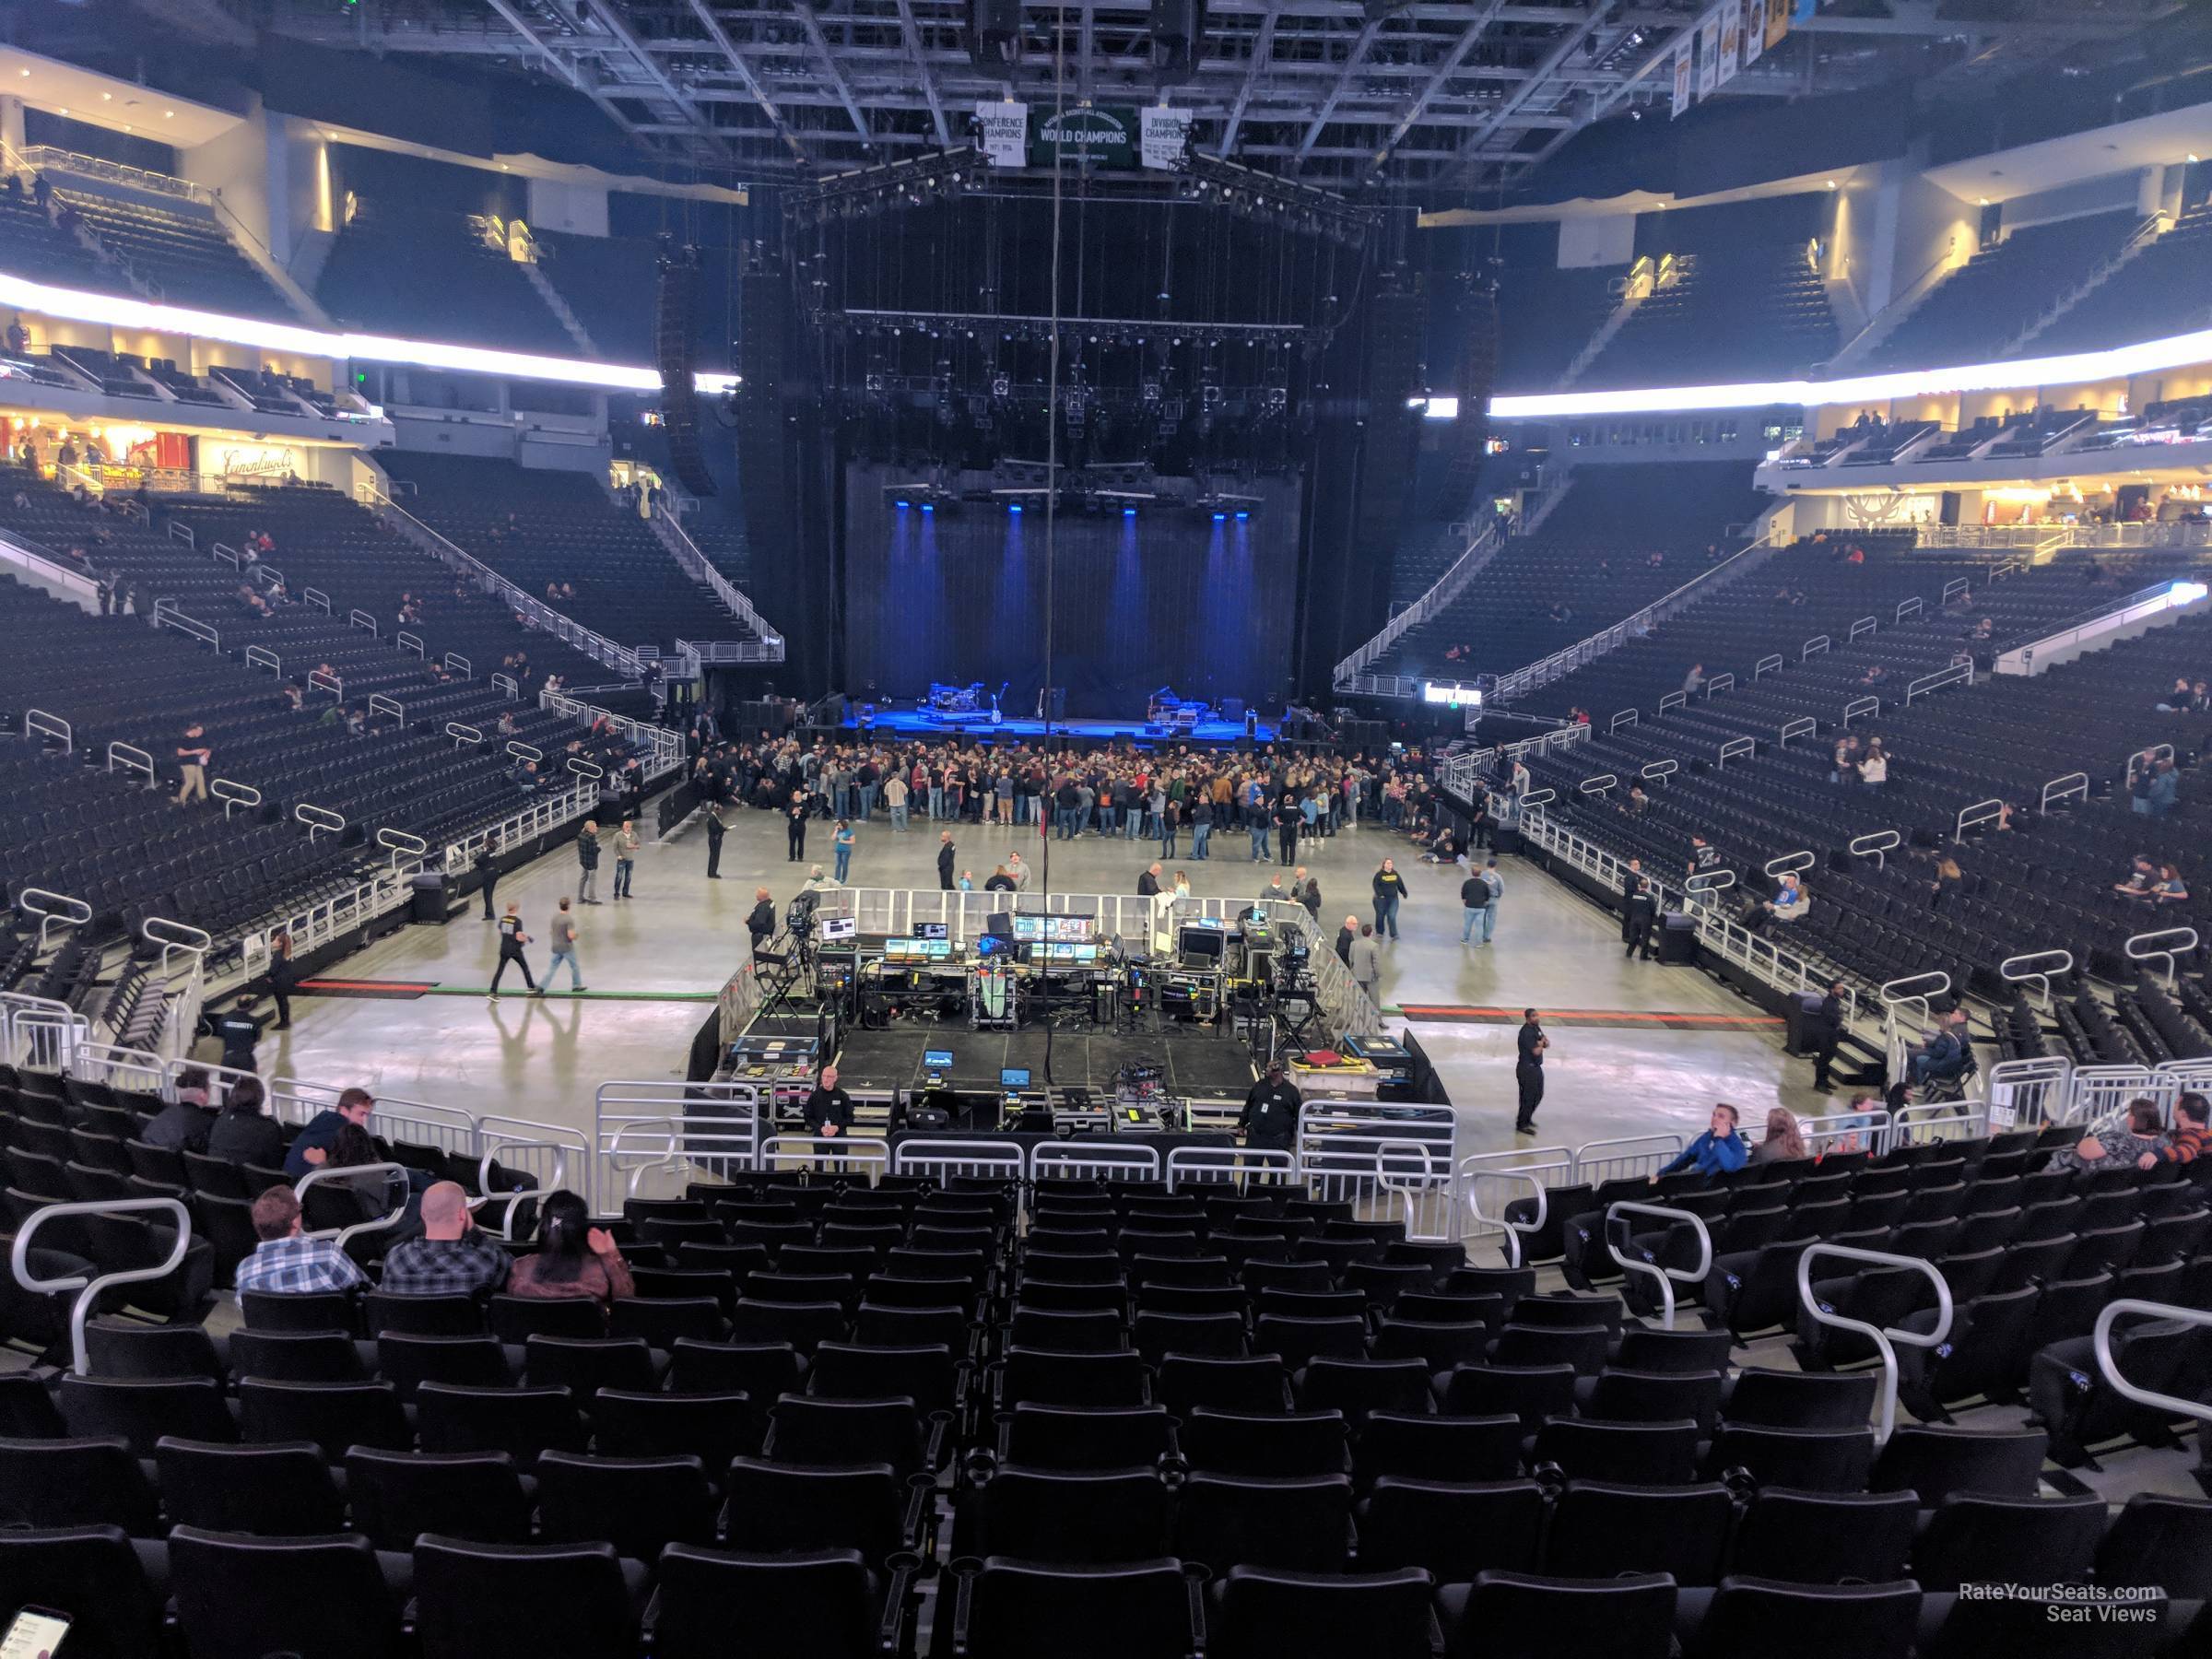 Fiserv Forum Seating for Concerts